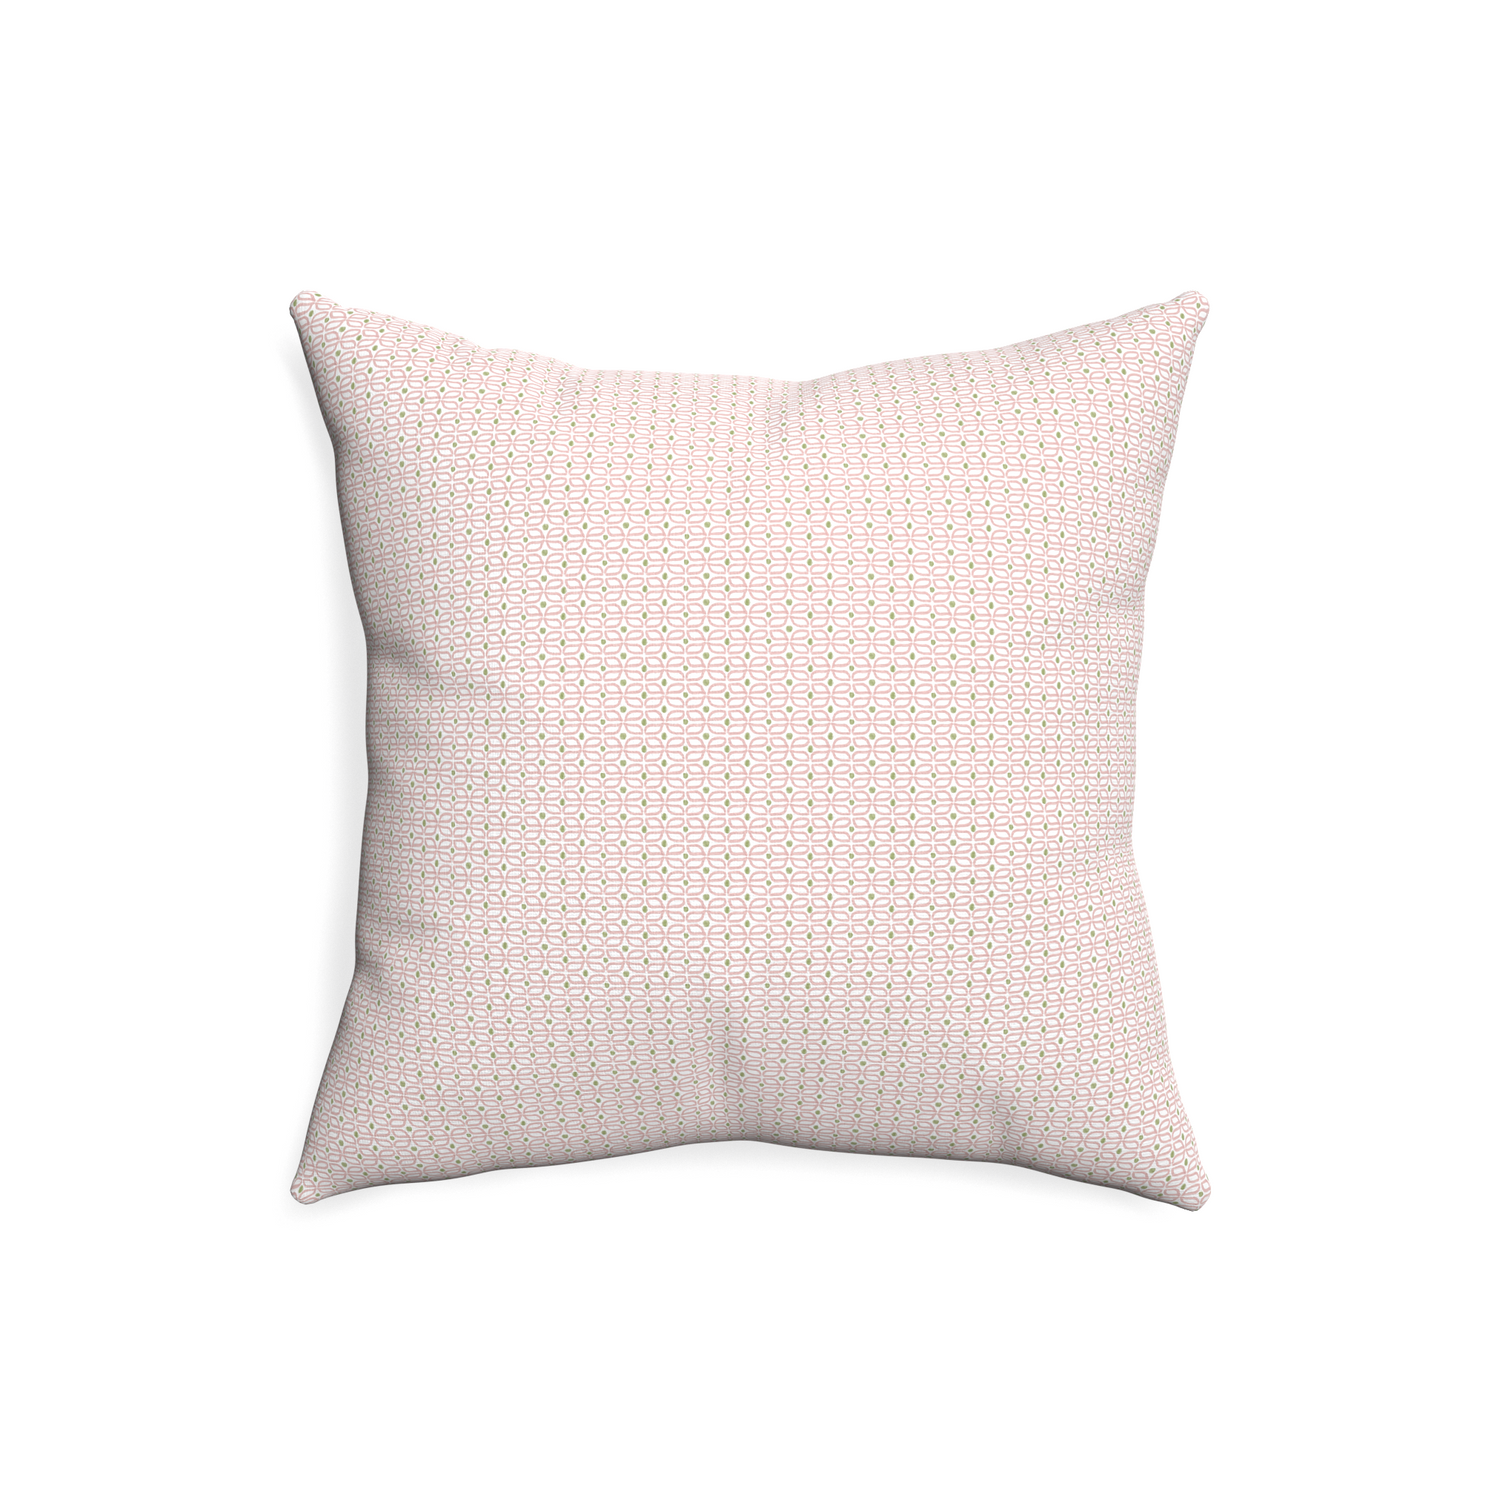 20-square loomi pink custom pink geometricpillow with none on white background